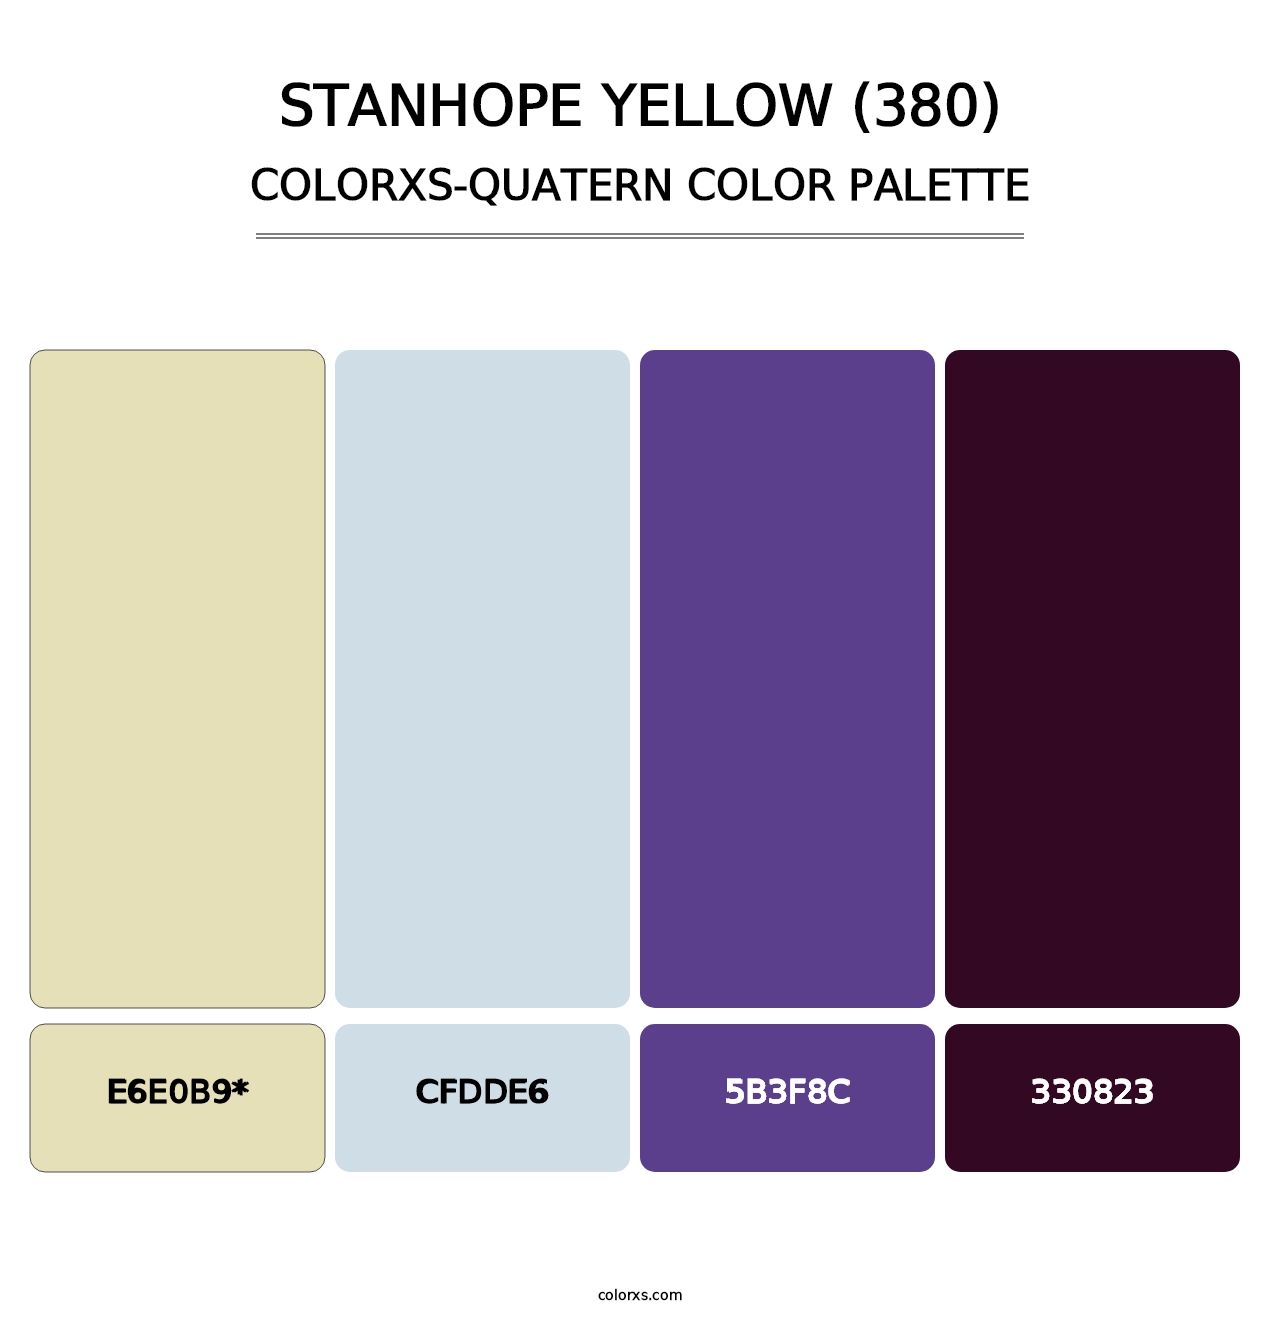 Stanhope Yellow (380) - Colorxs Quatern Palette